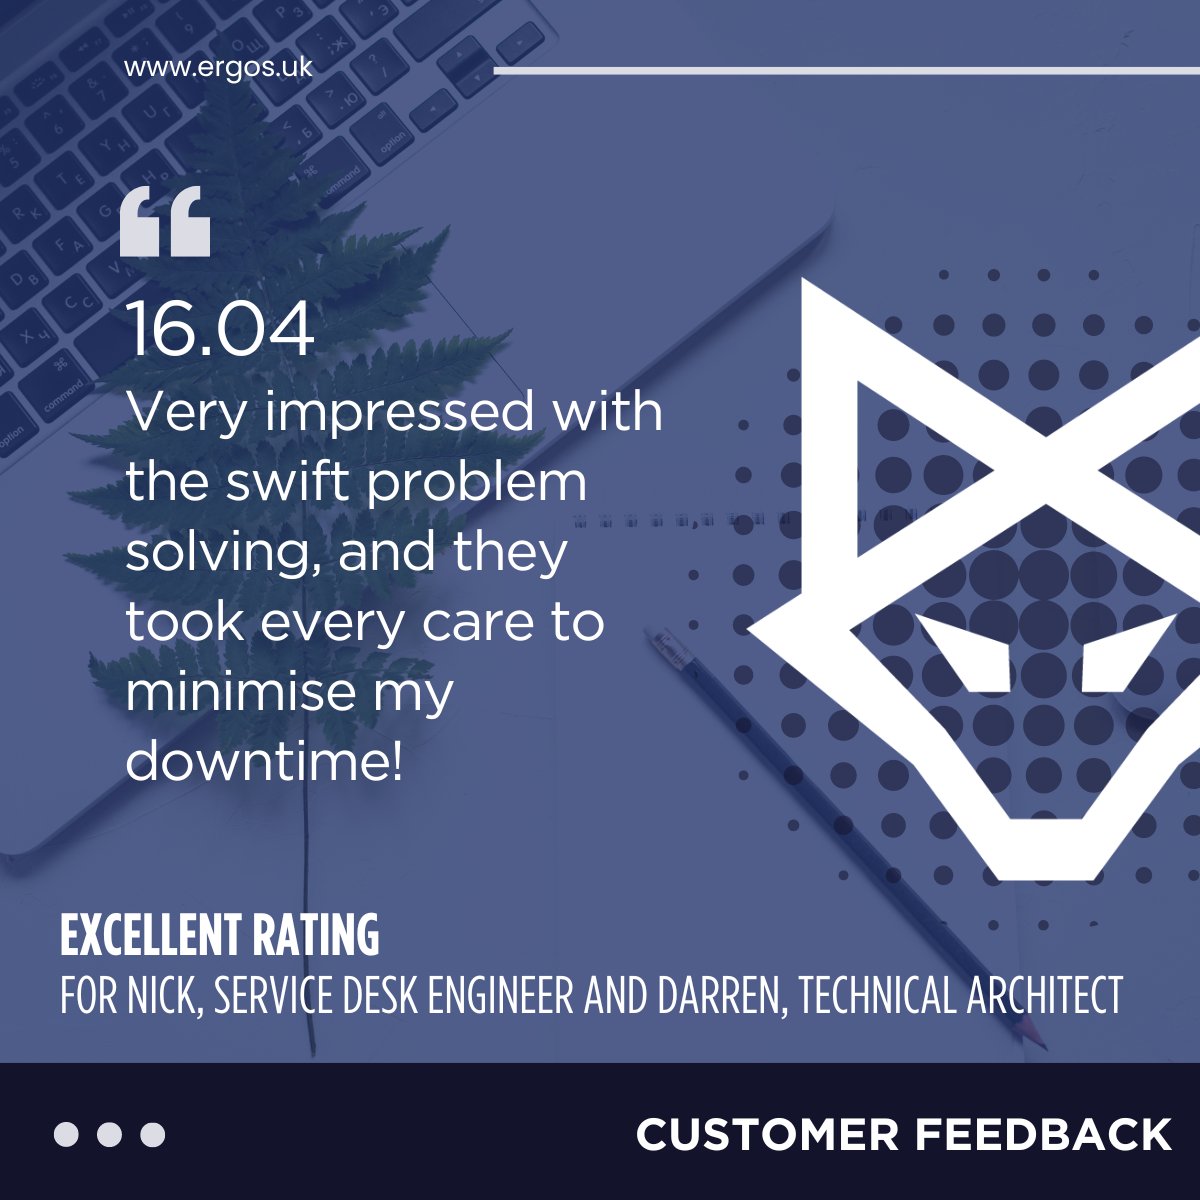 We've just received a lengthy praise for Nick's and Darren's work on a complex connectivity compliance issue. Congratulations on your Accuracy, Great Communication, Helpfulness and Response Time!

#cybersecurity #technology #msp #itservices #itmanagedservices #it #london